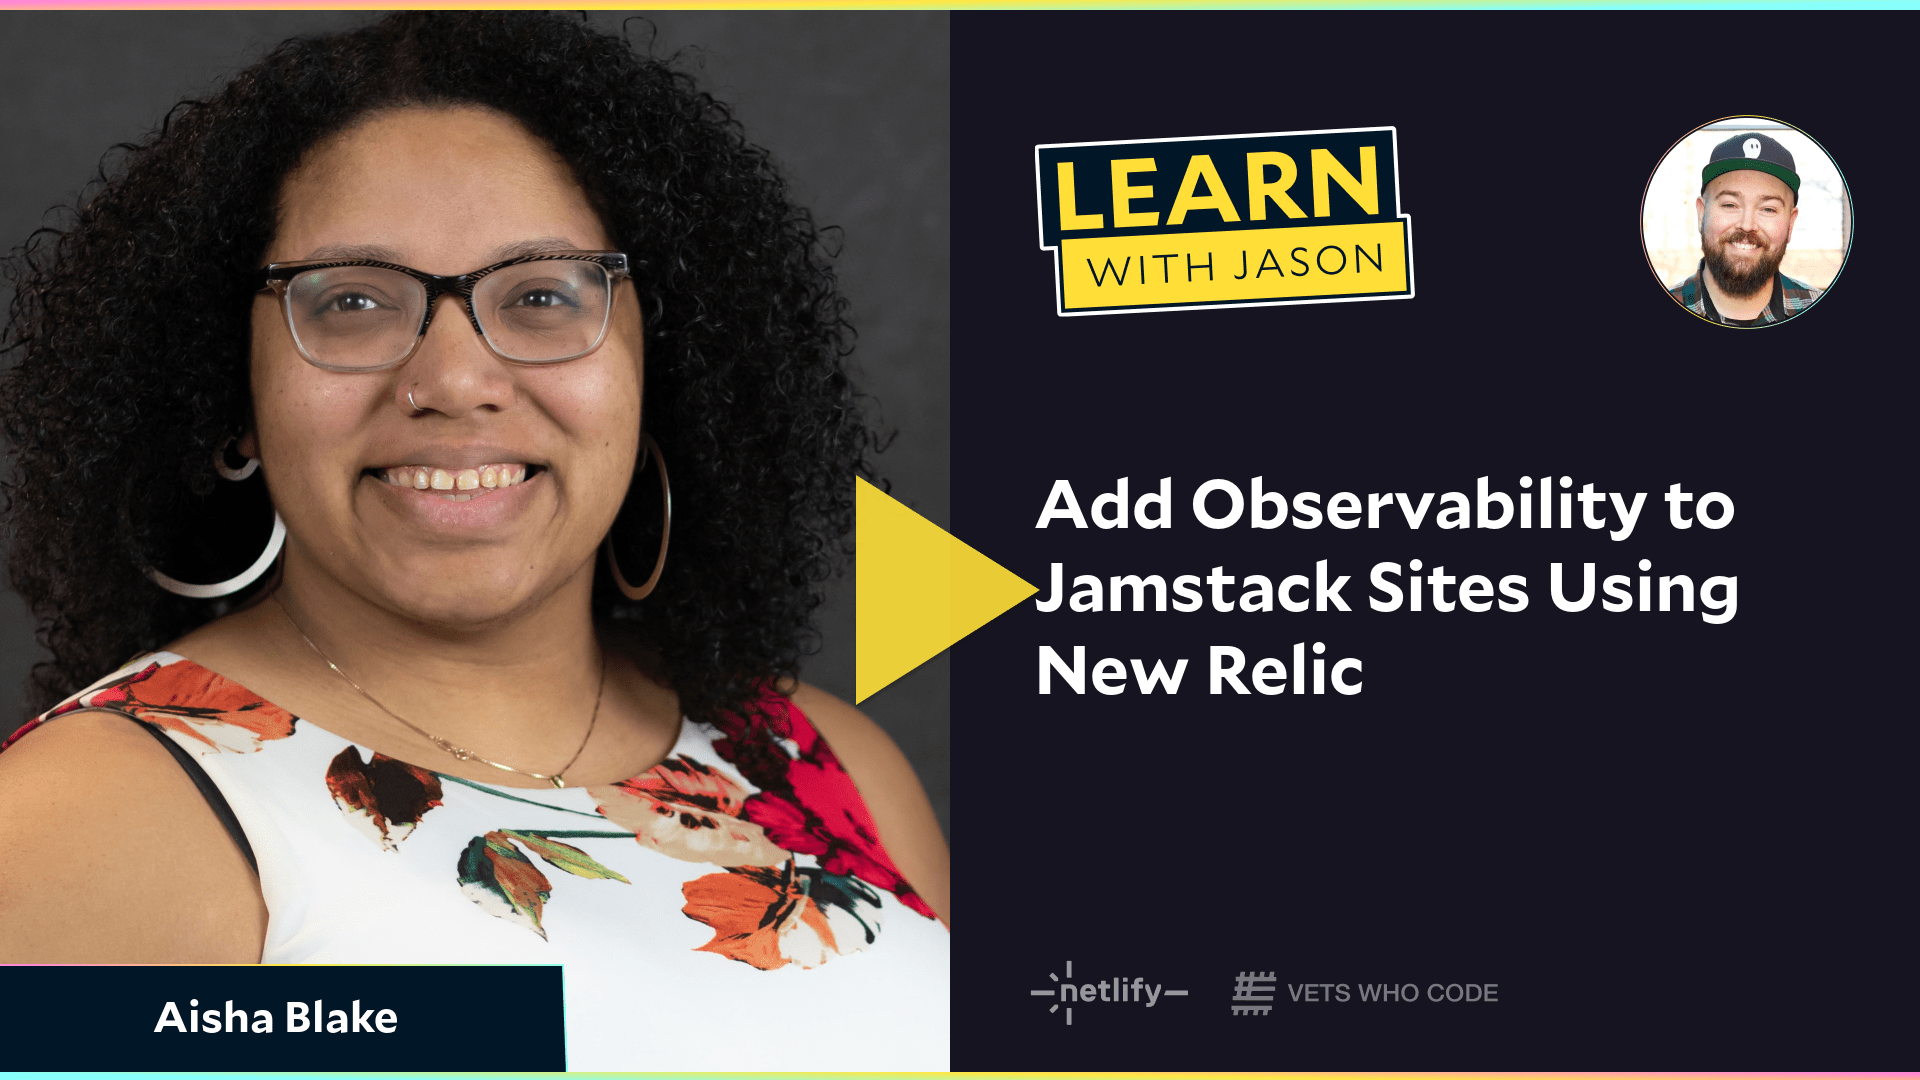 Add Observability to Jamstack Sites Using New Relic (with Aisha Blake)